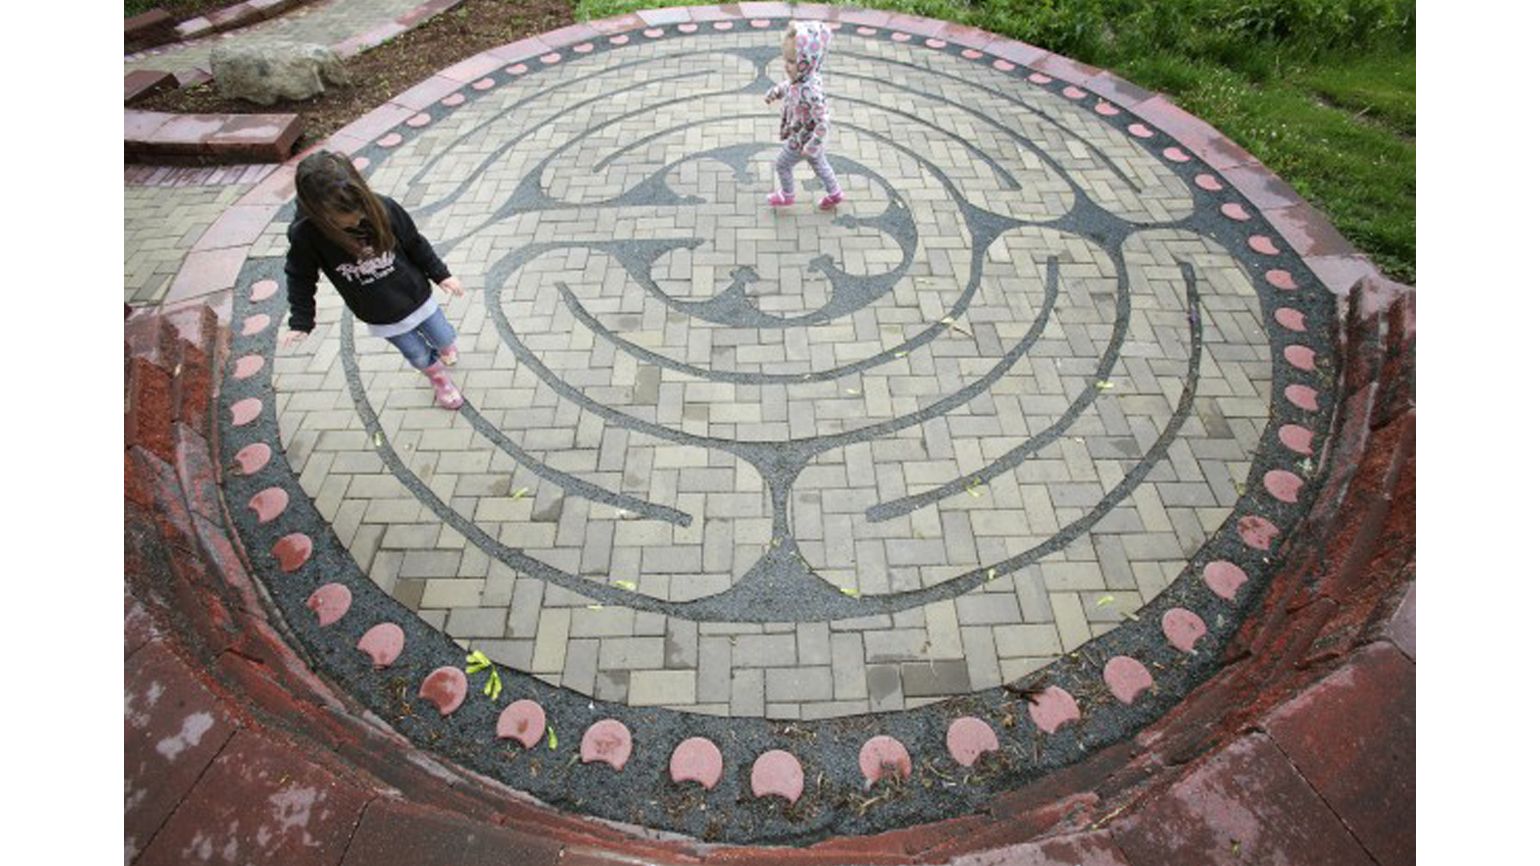 St. Mary’s Hospital Labyrinth; Photo credit: M.P. King-State Journal